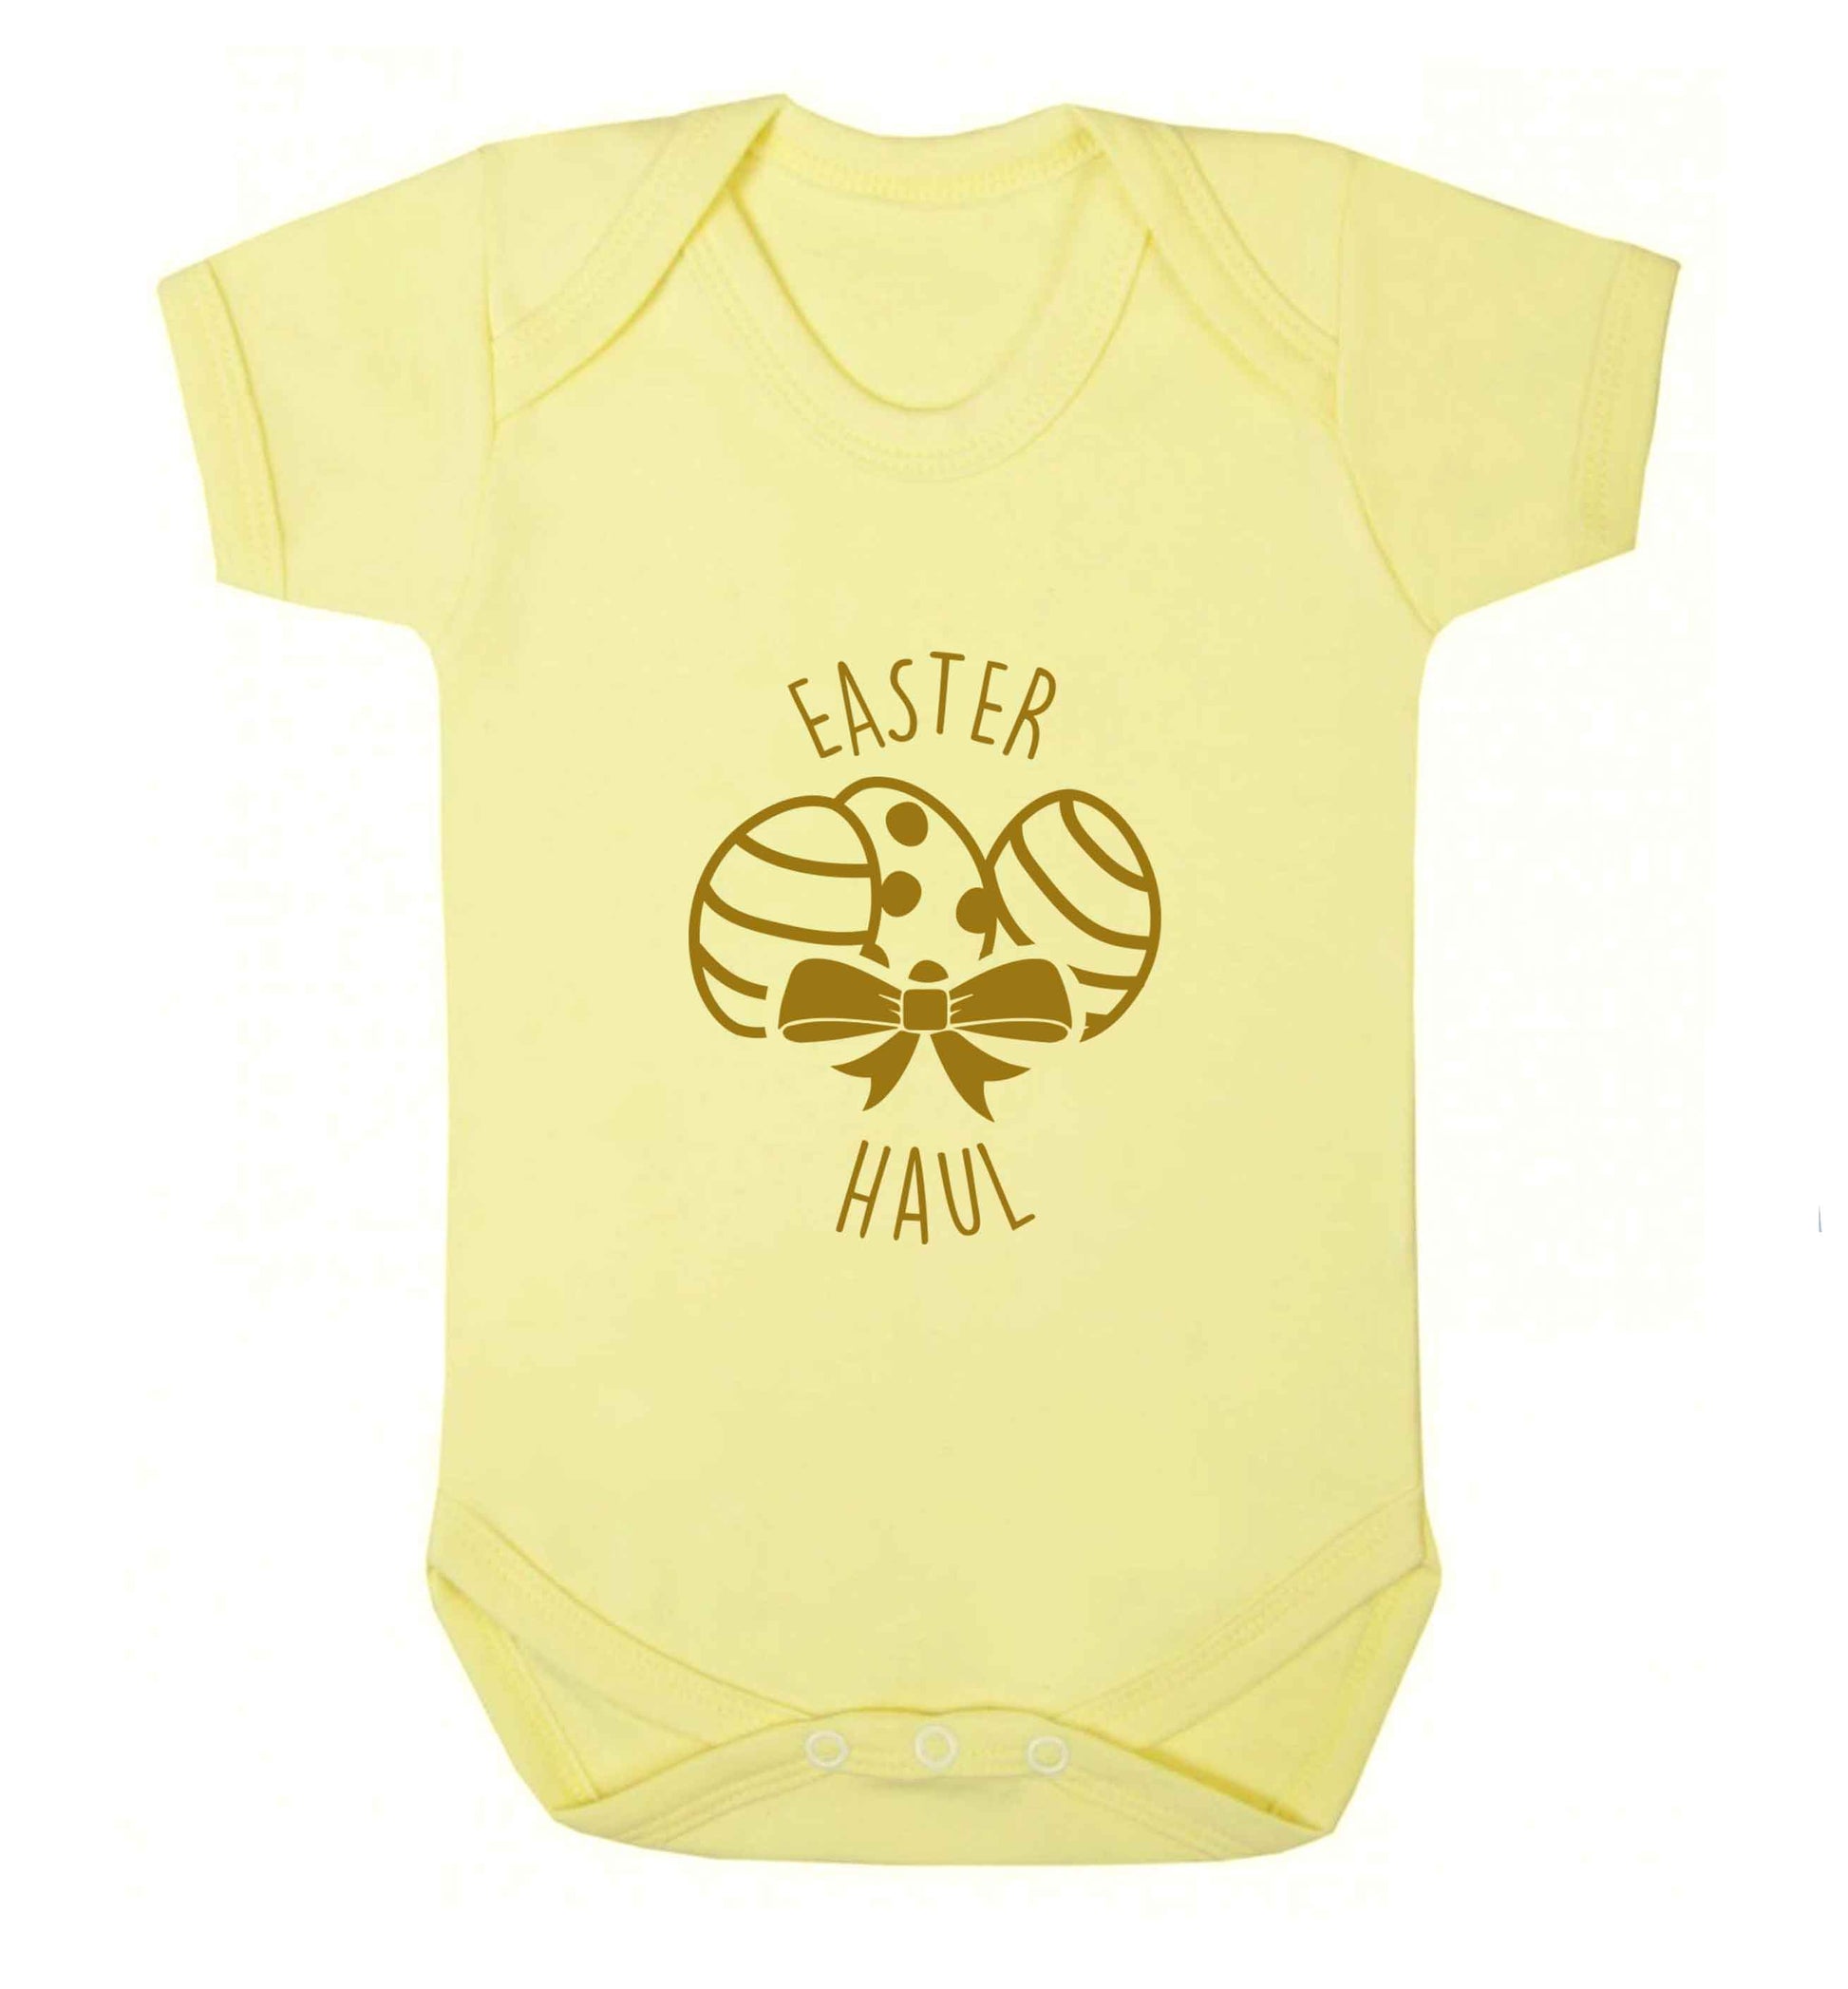 Easter haul baby vest pale yellow 18-24 months